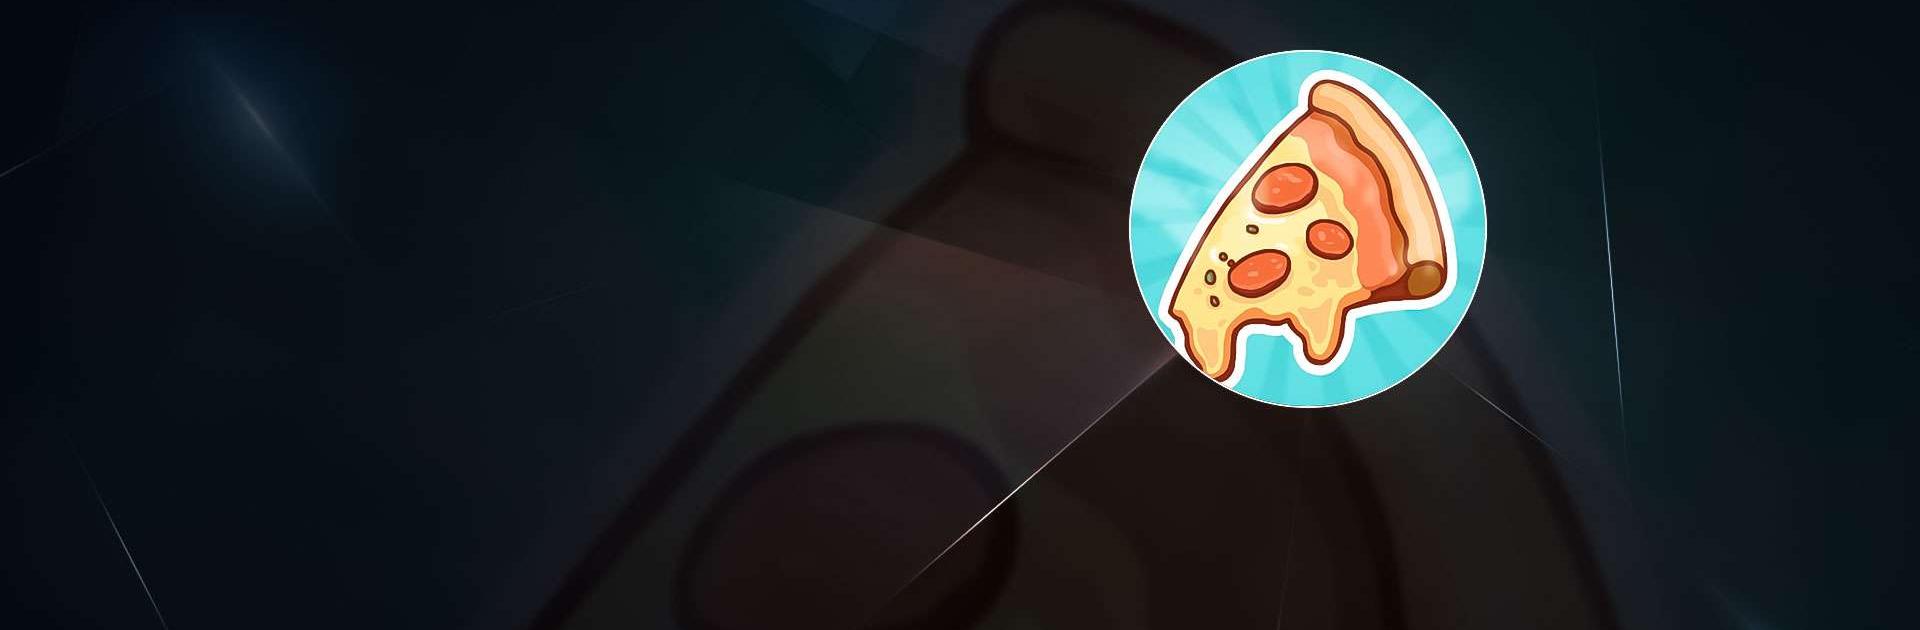 My Pizza Story